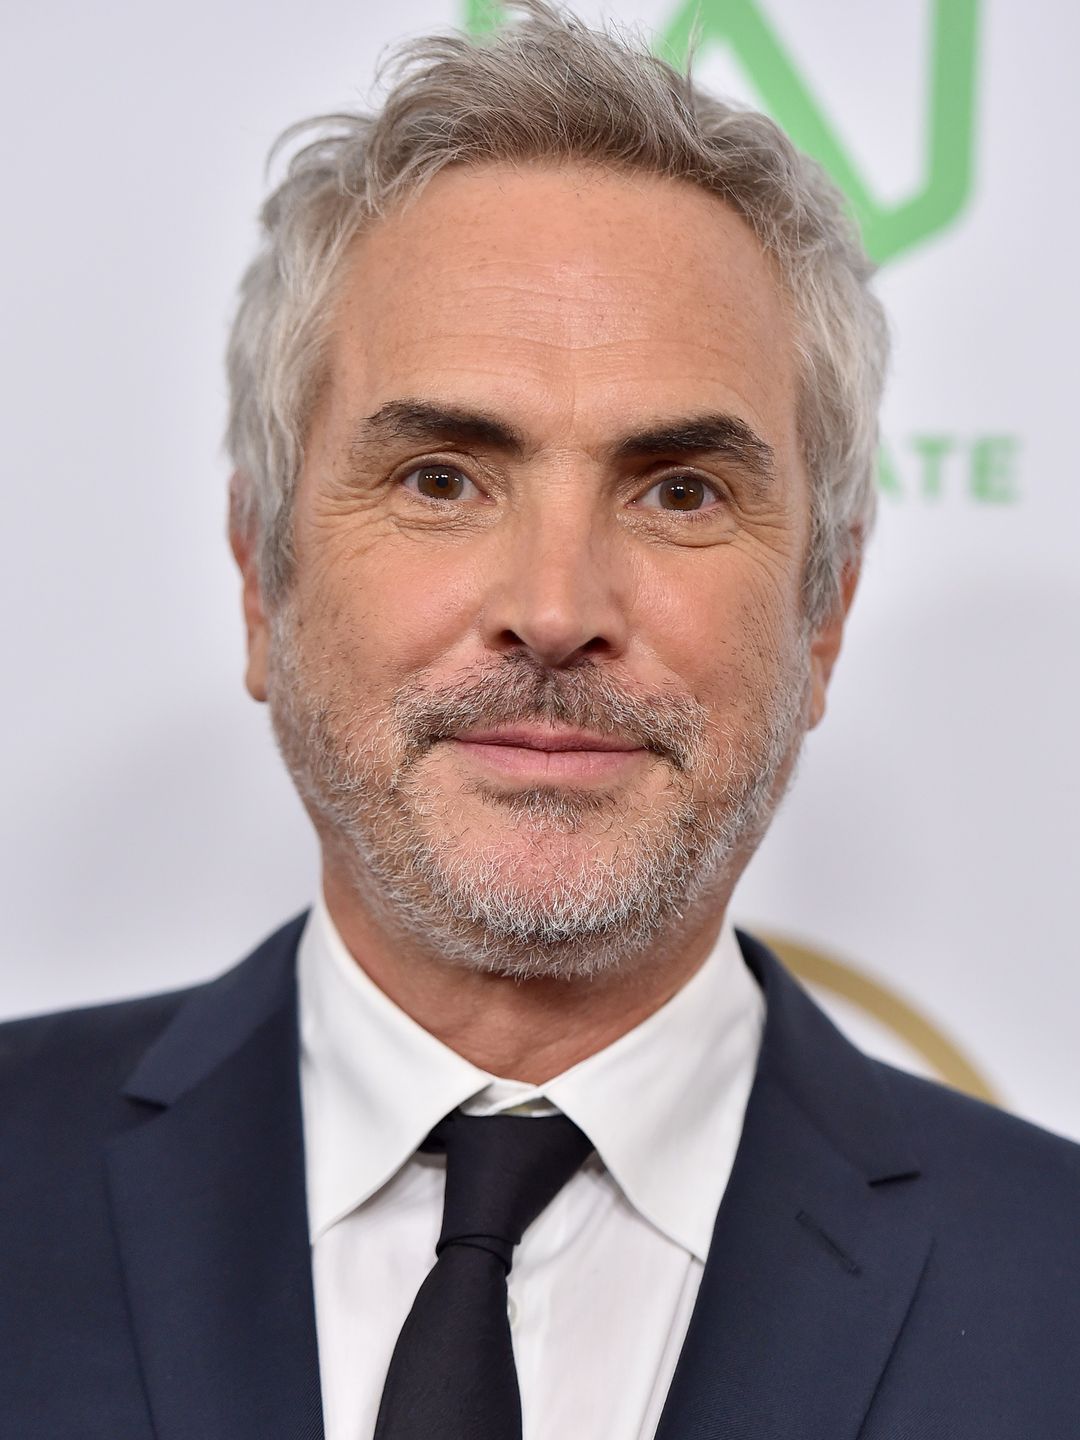 Alfonso Cuarón how old is he